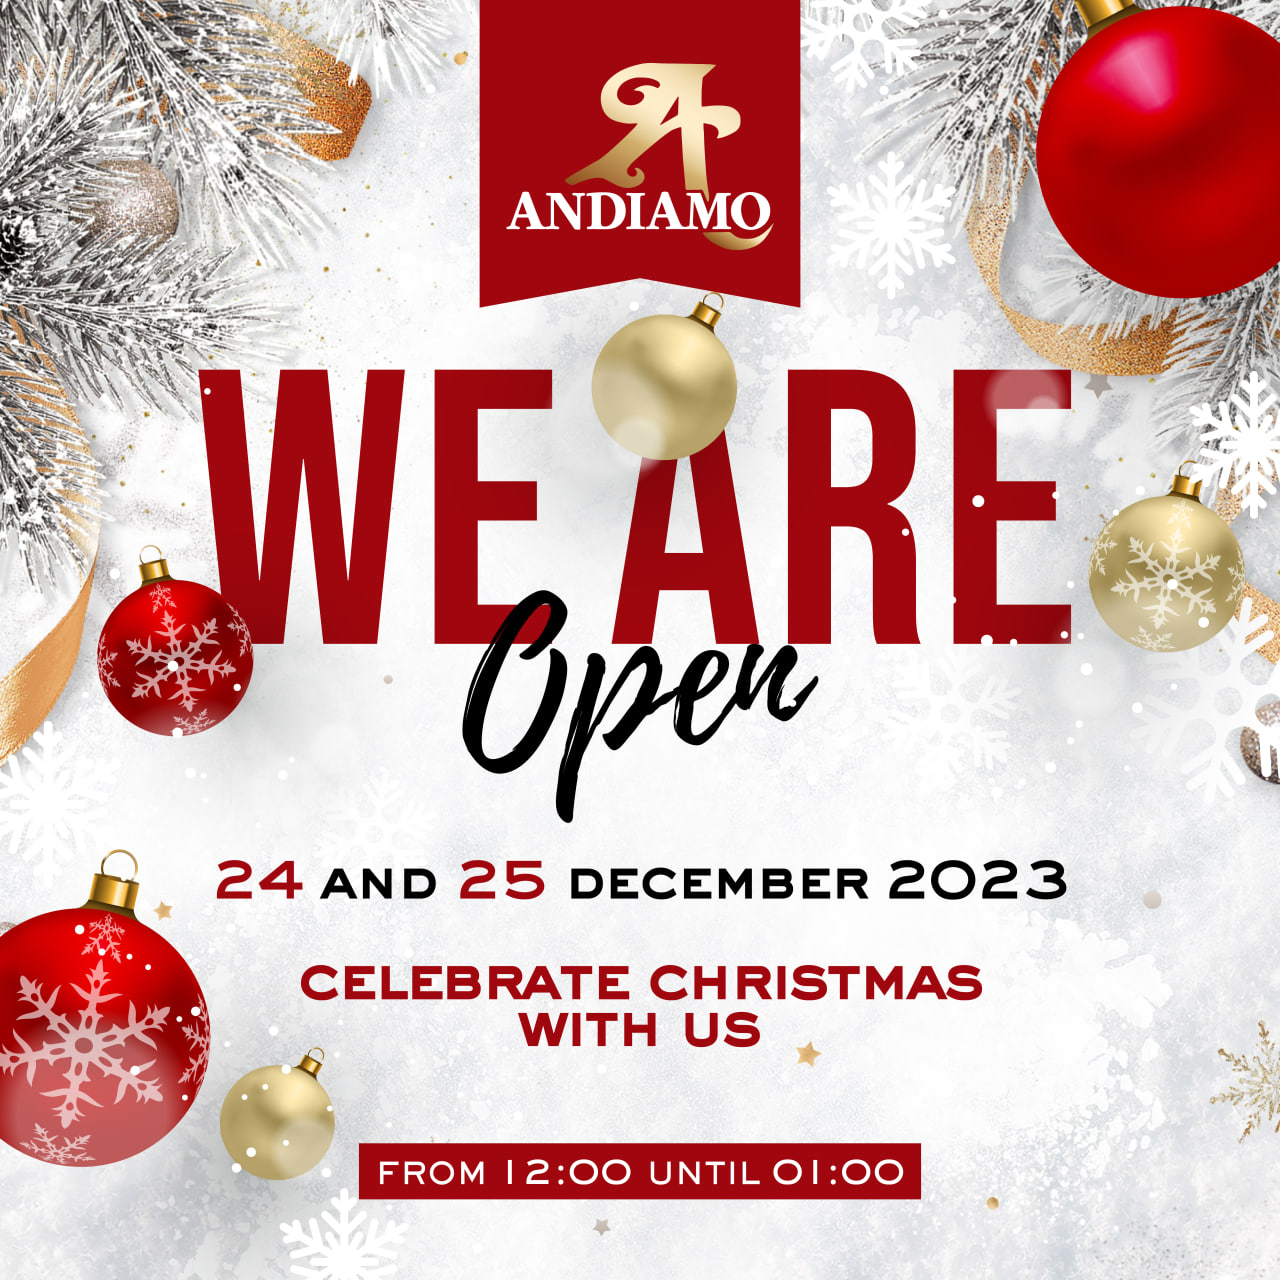 Christmas in ANDIAMO, 24 and 25 december 2023